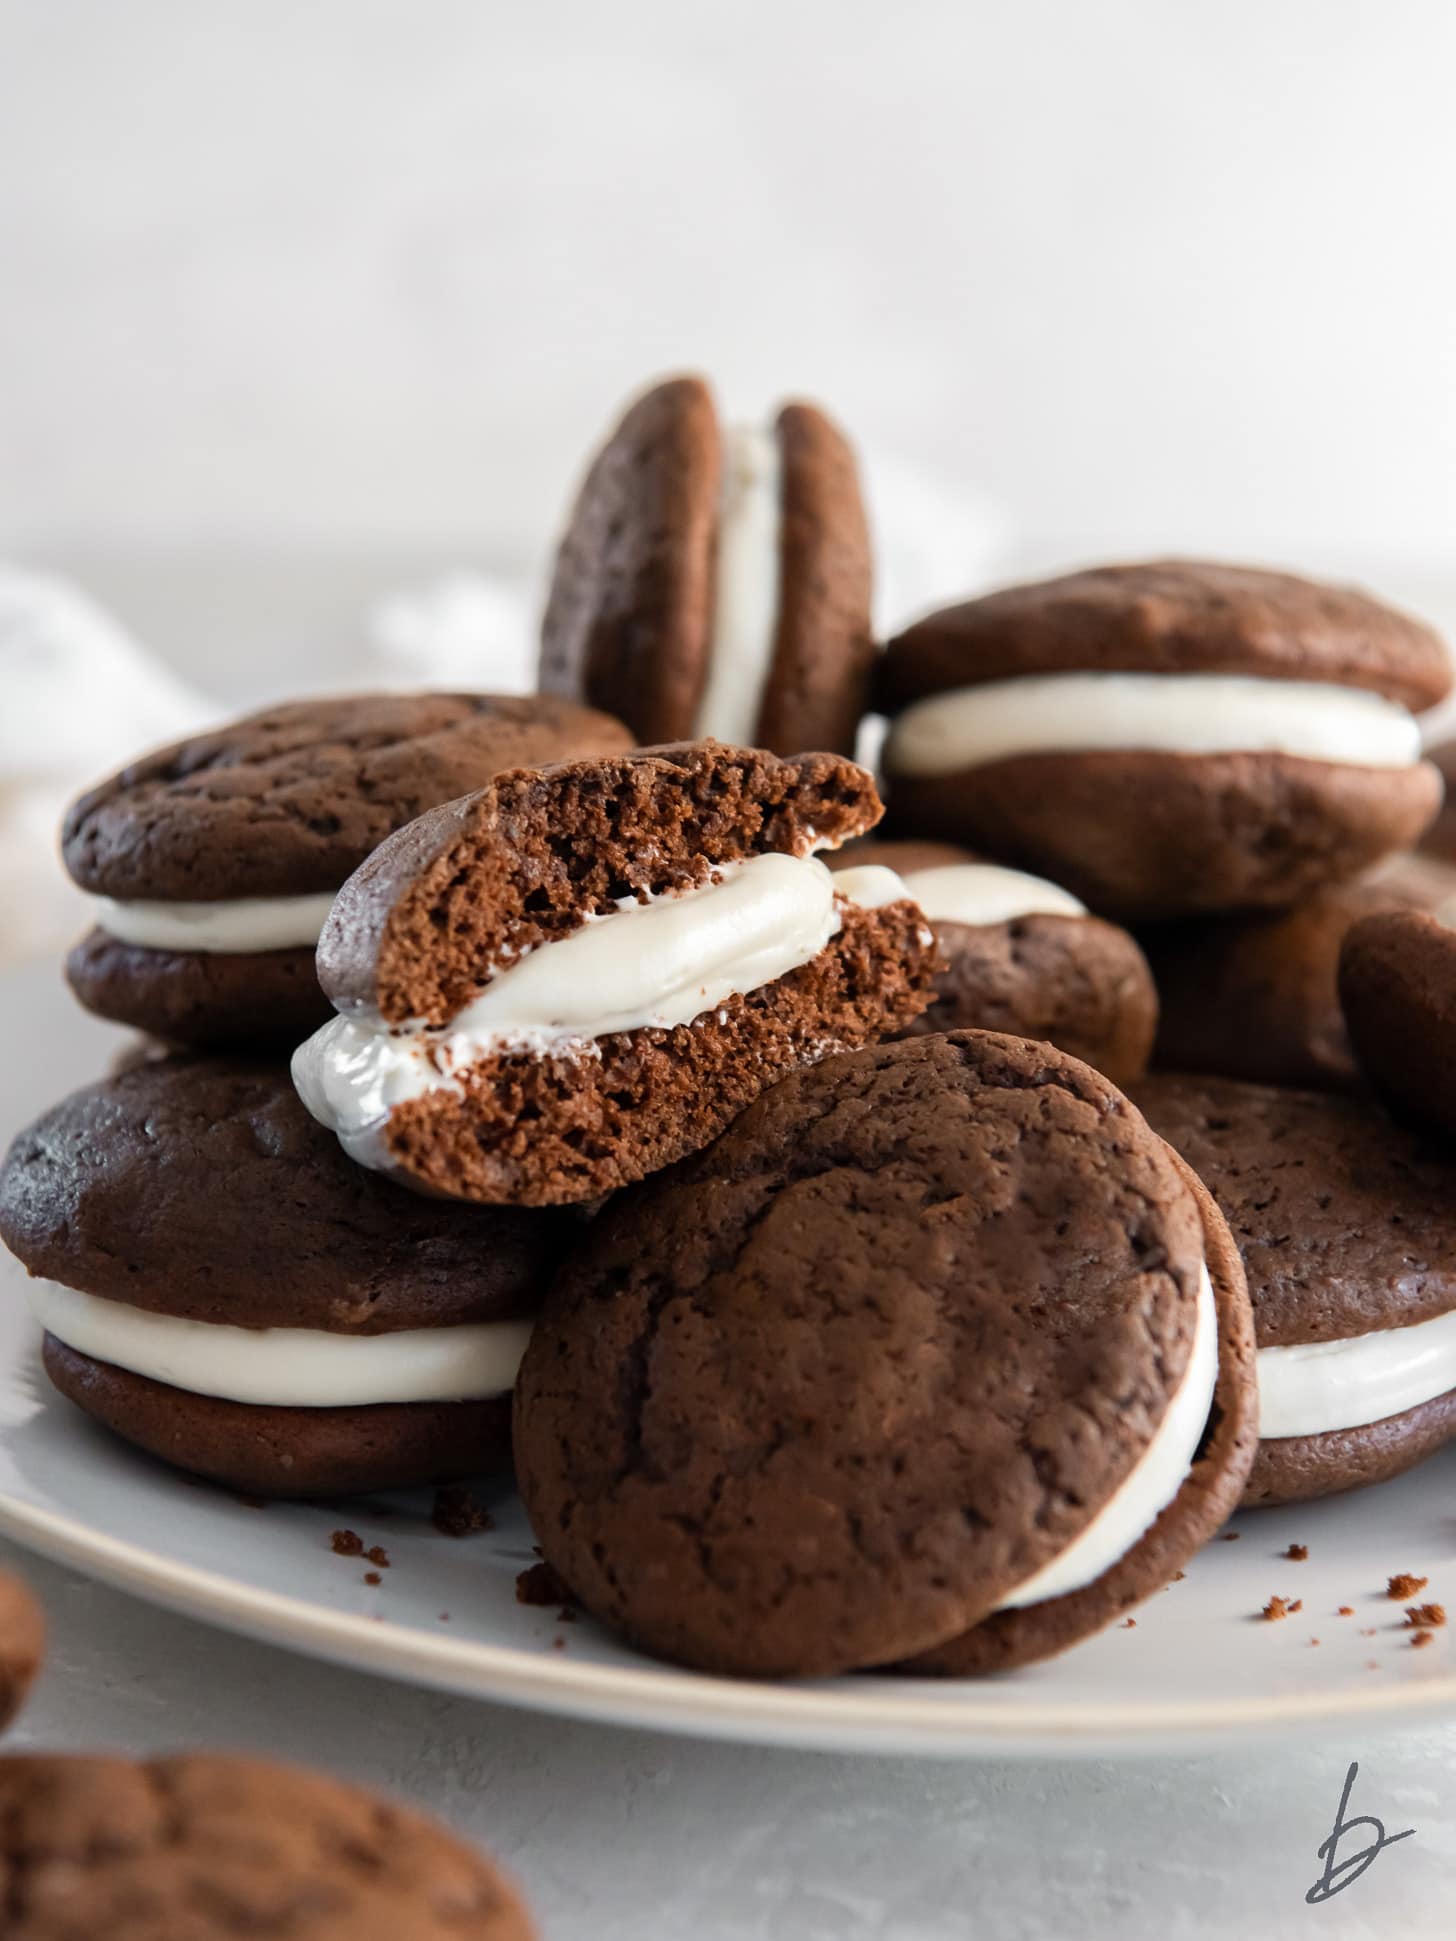 chocolate whoopie pie with bite in pile of more whoopie pies on plate.